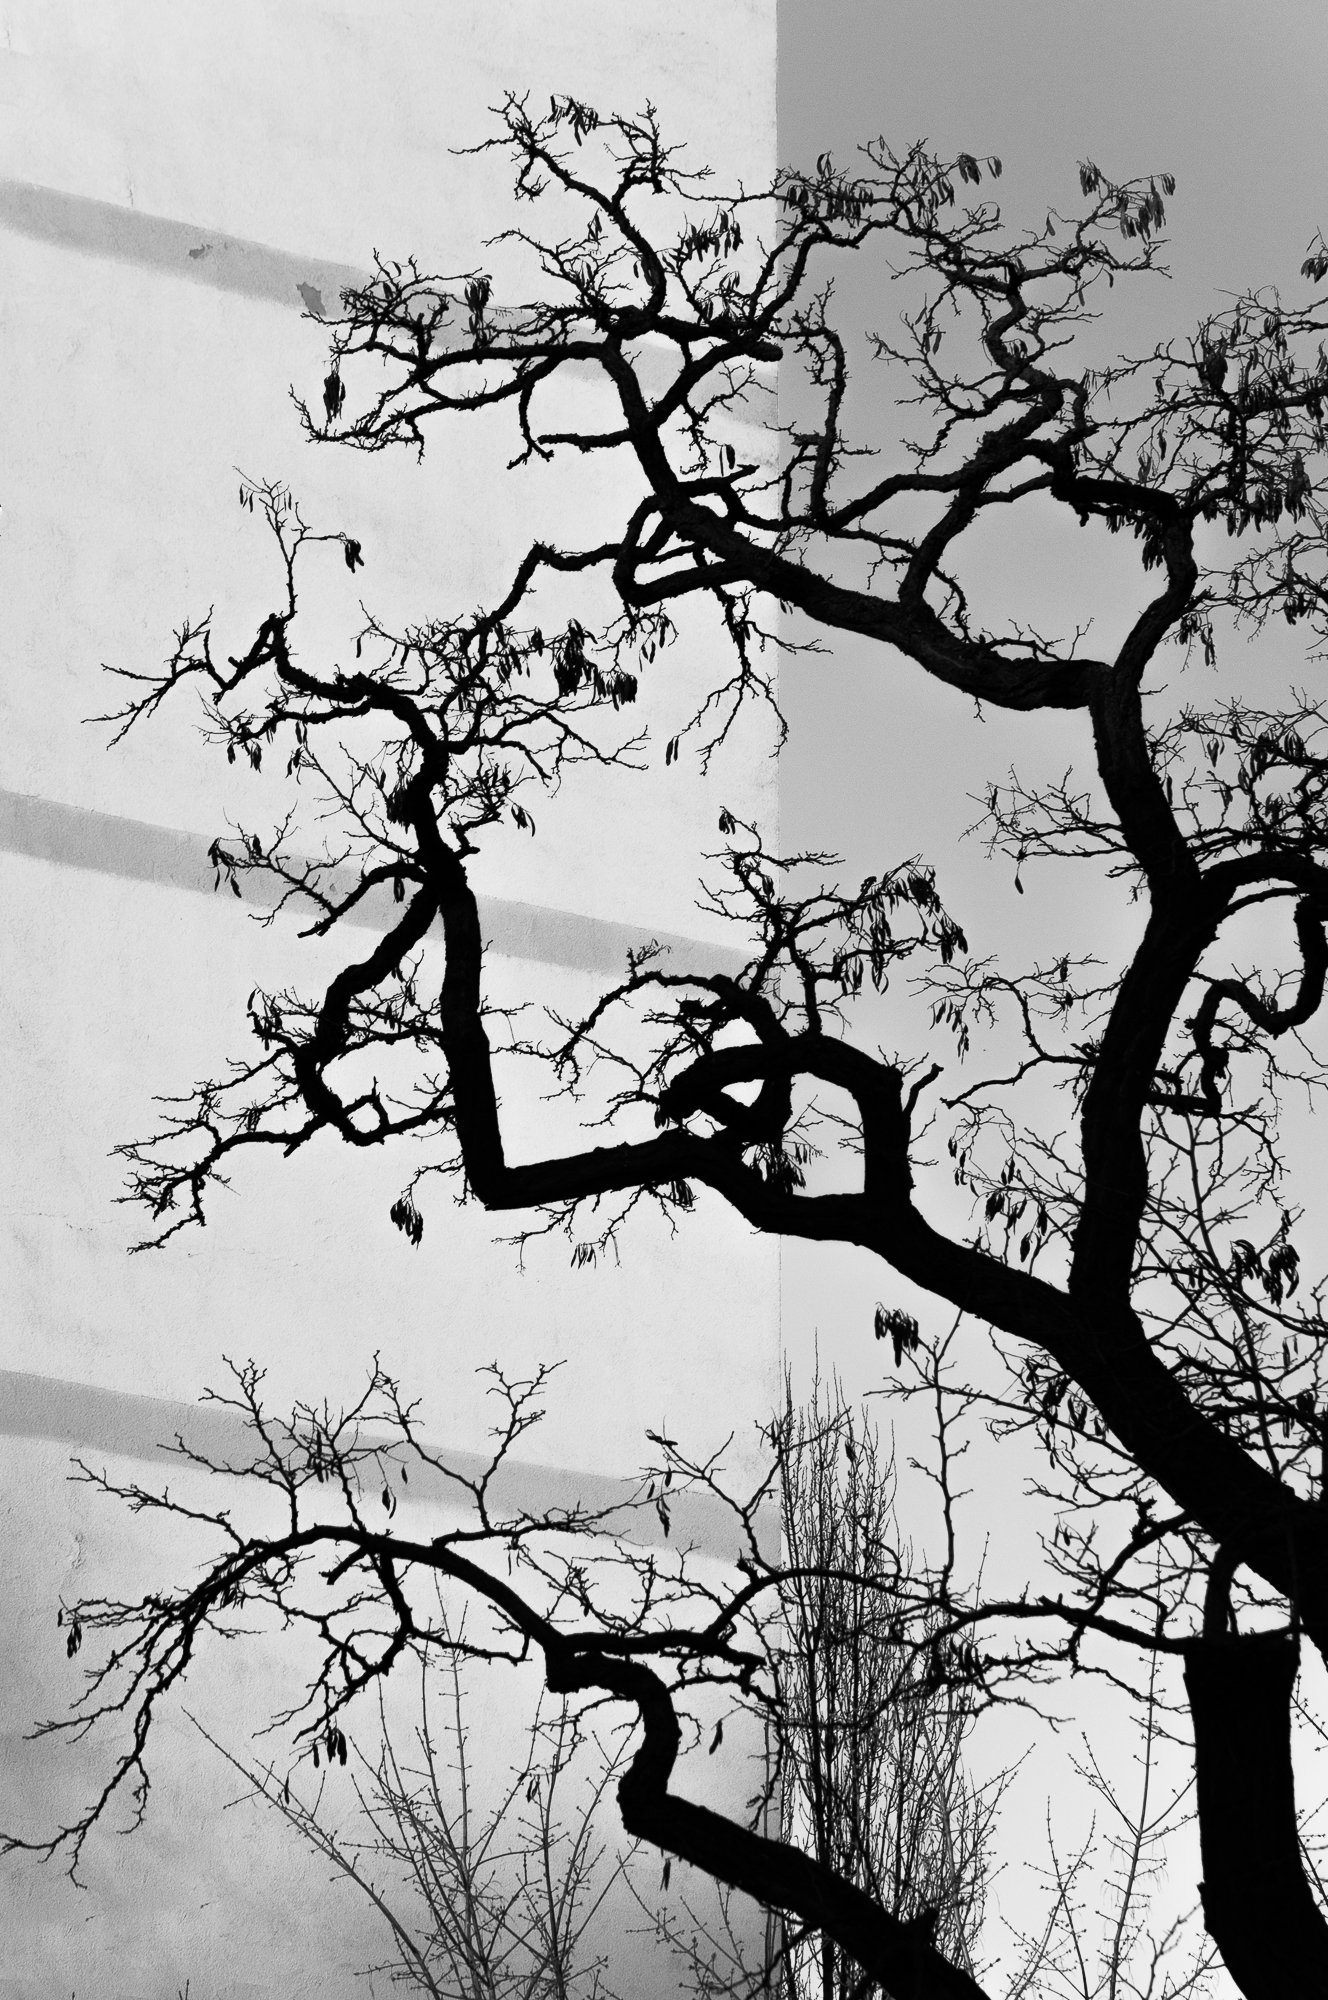 Adam Mazek Photography Warsaw 2017. Minimalism. Curly branches of the tree. "Negation of the End." Inspired by Hiroshige. "Negacja Końca"